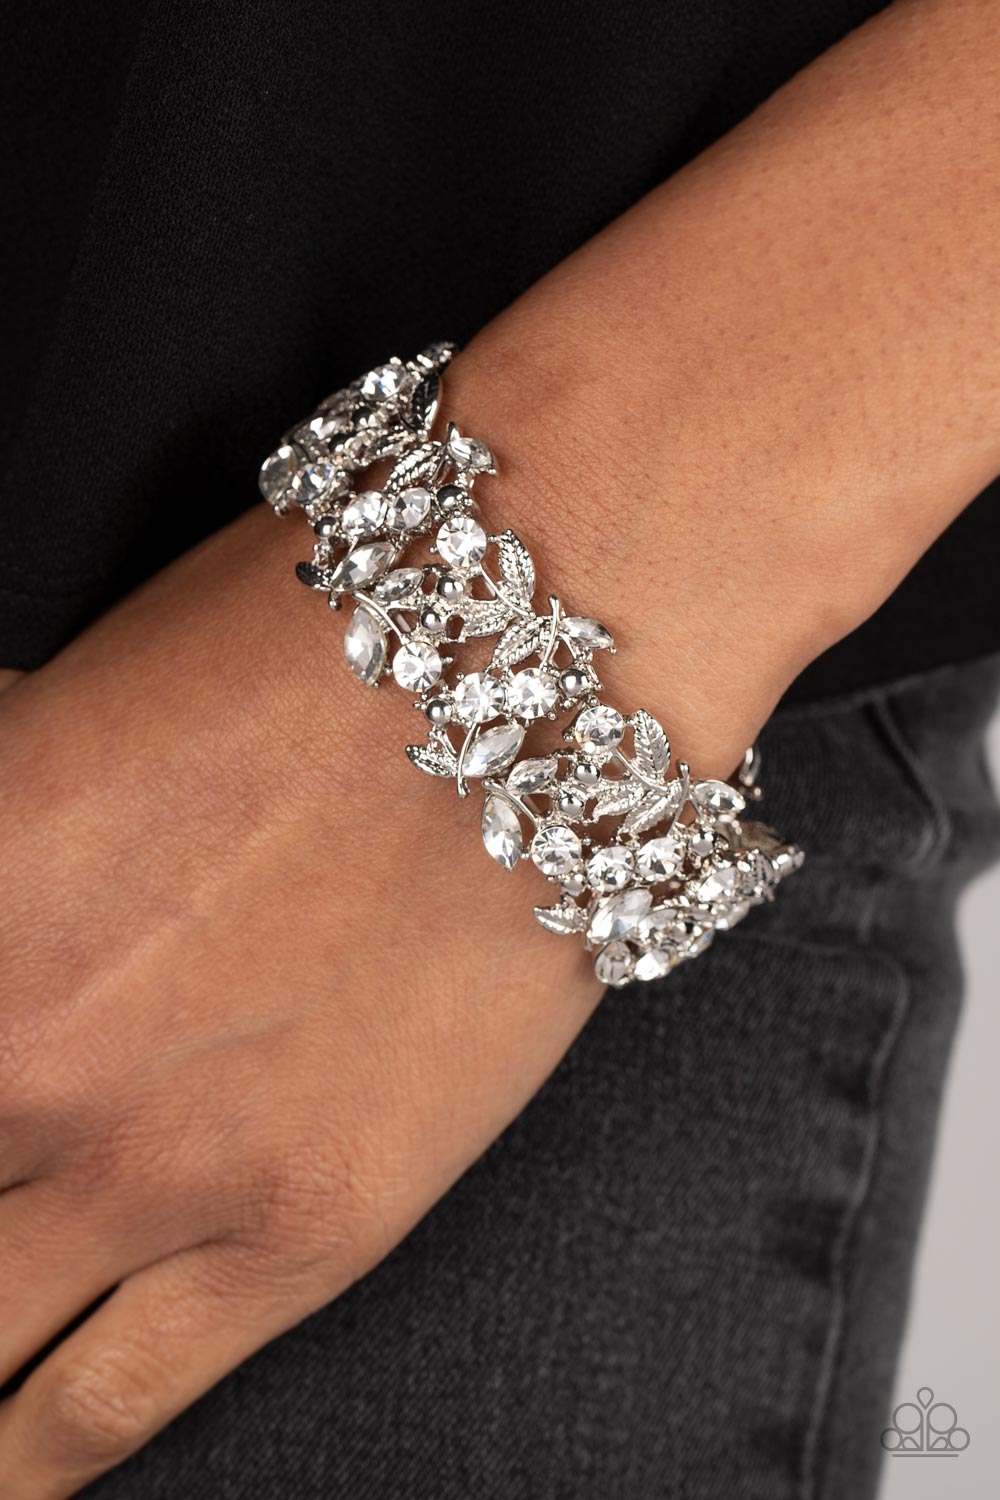 Feathered Finesse Paparazzi Accessories Bracelet White